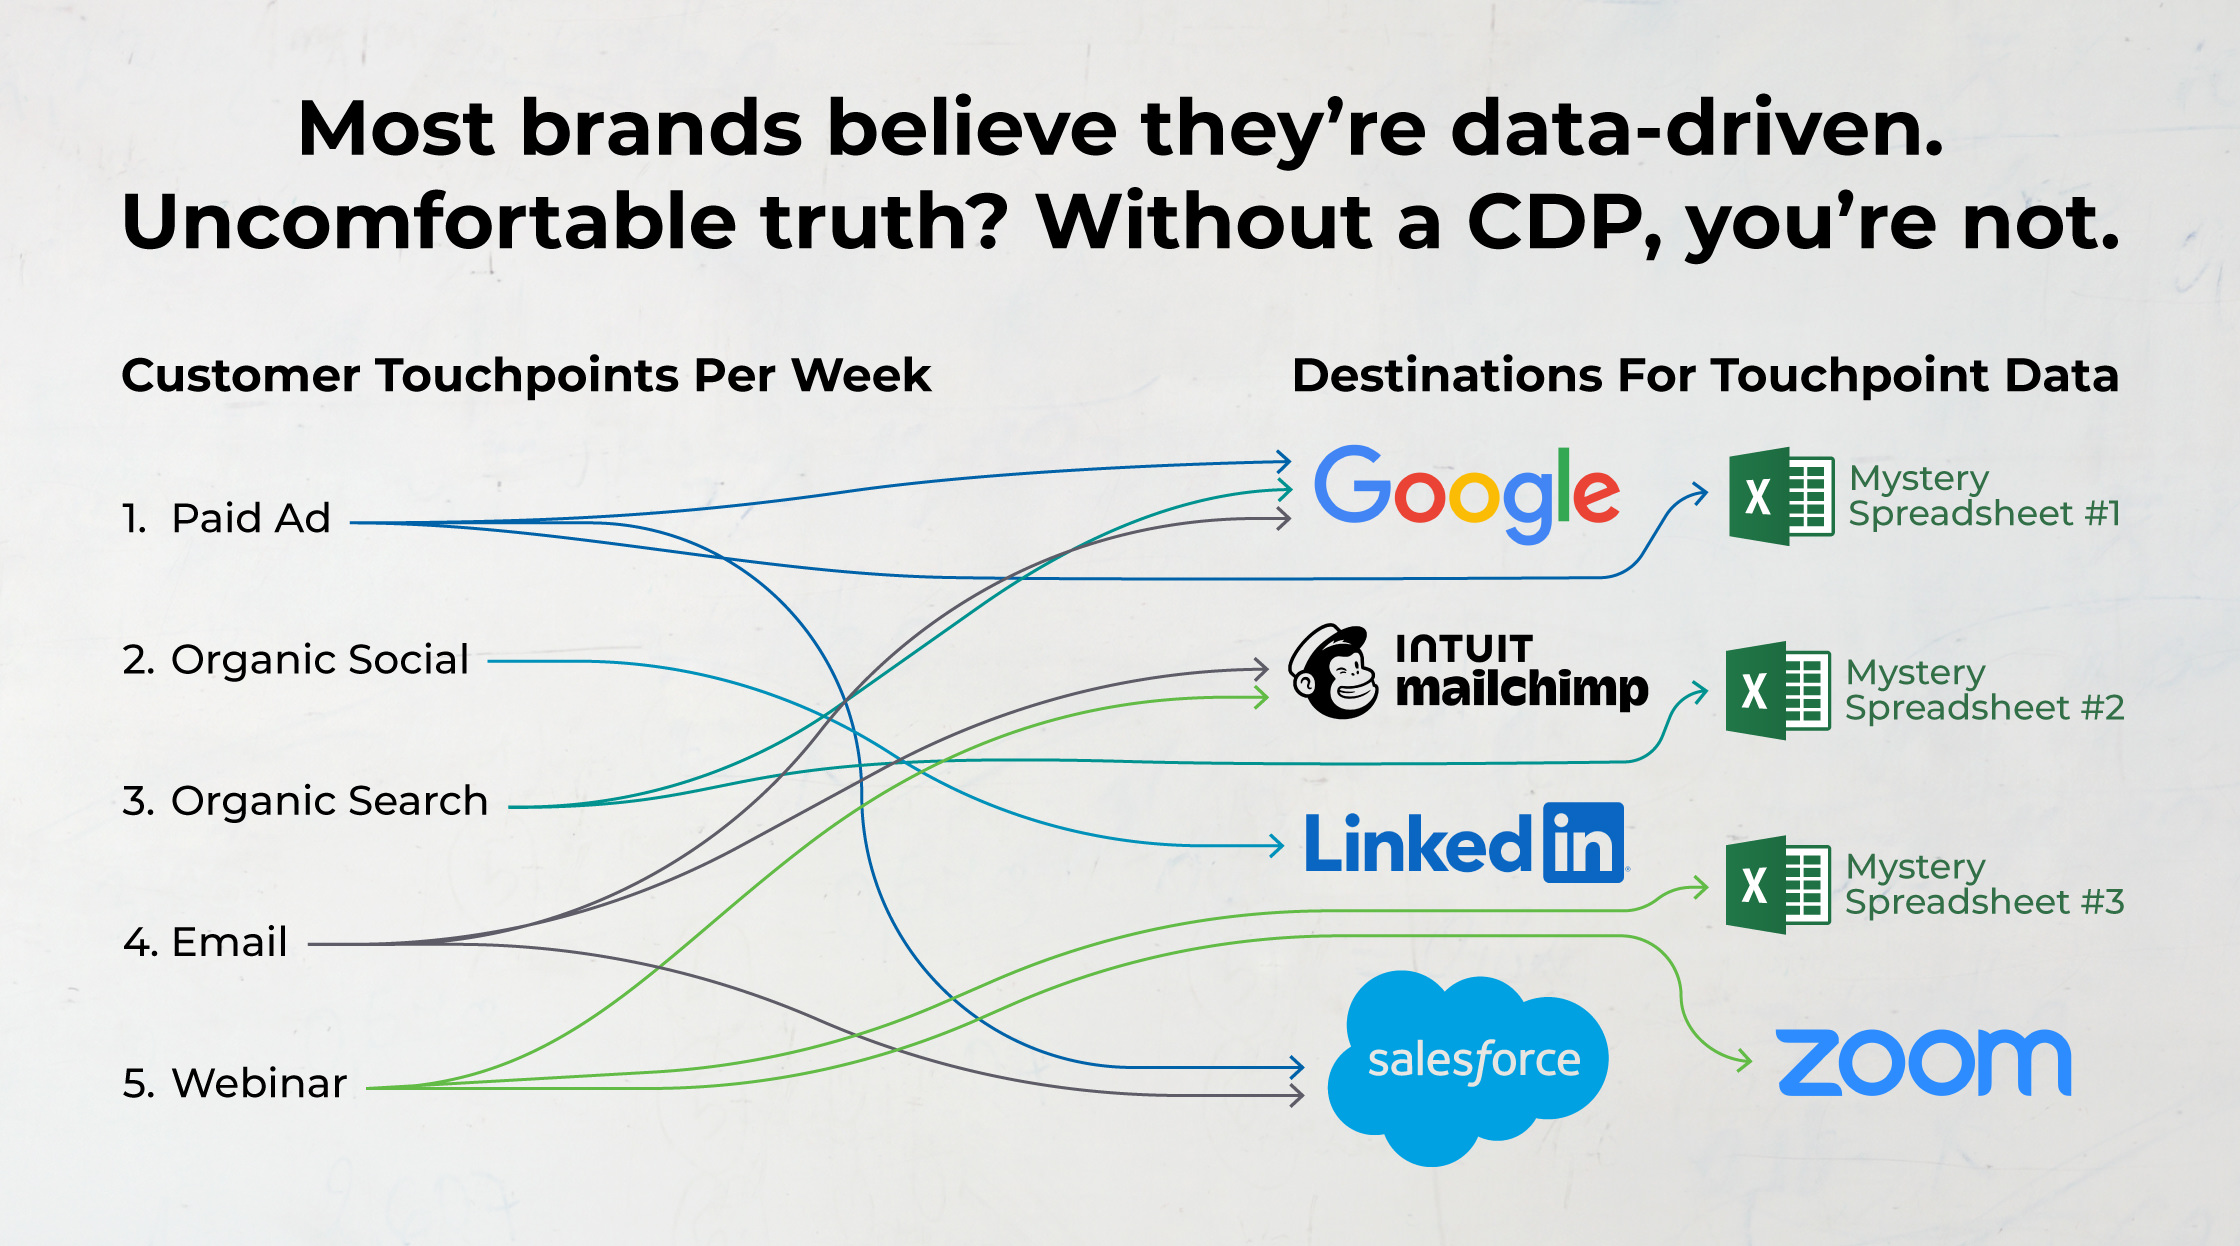 Most brands believe they're data-driven. Uncomfortable truth? Without a CDP, you're not.